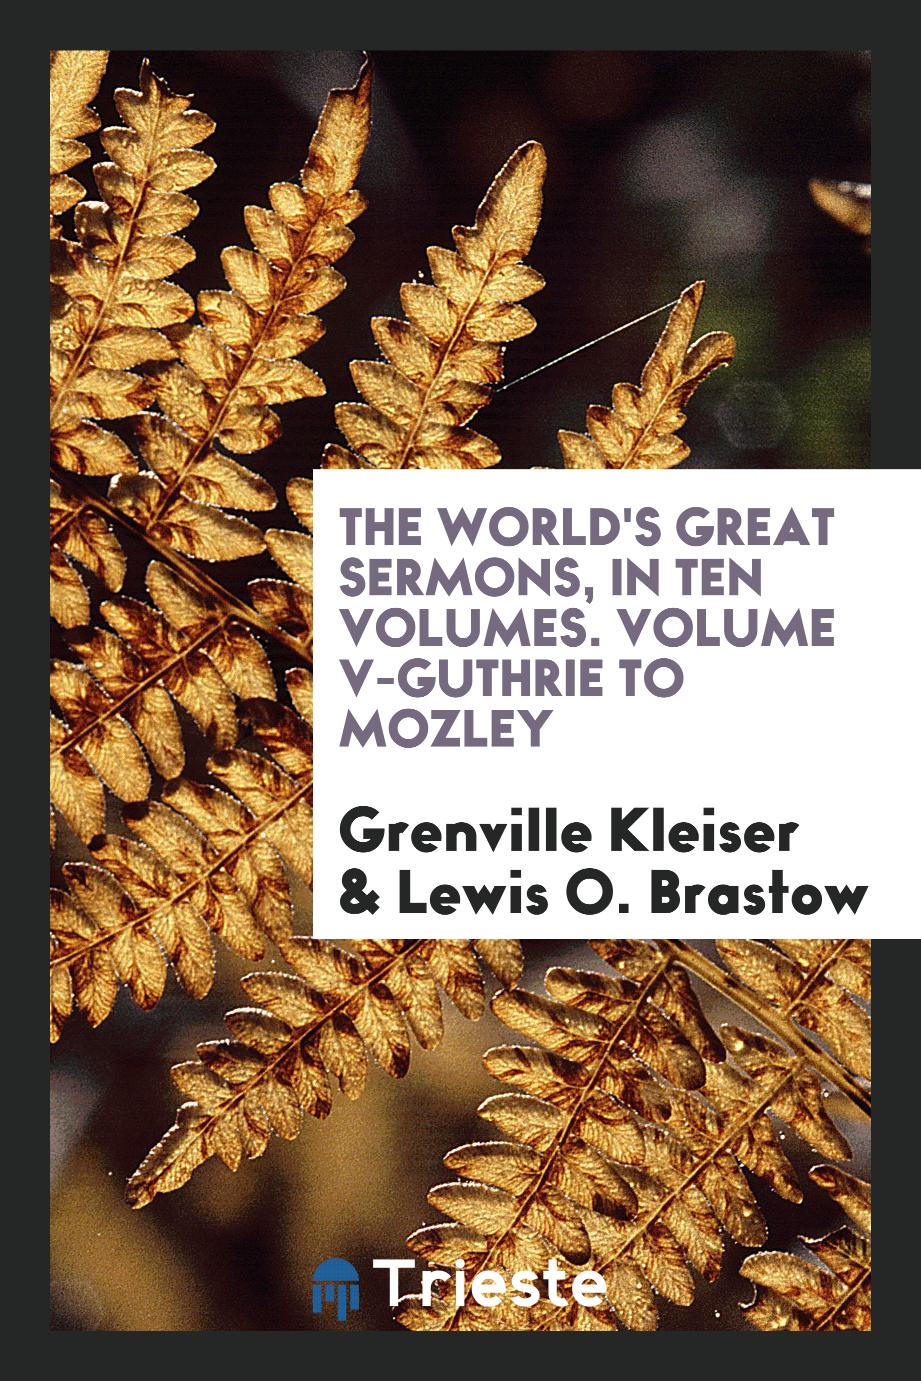 The World's Great Sermons, in Ten Volumes. Volume V-Guthrie to Mozley